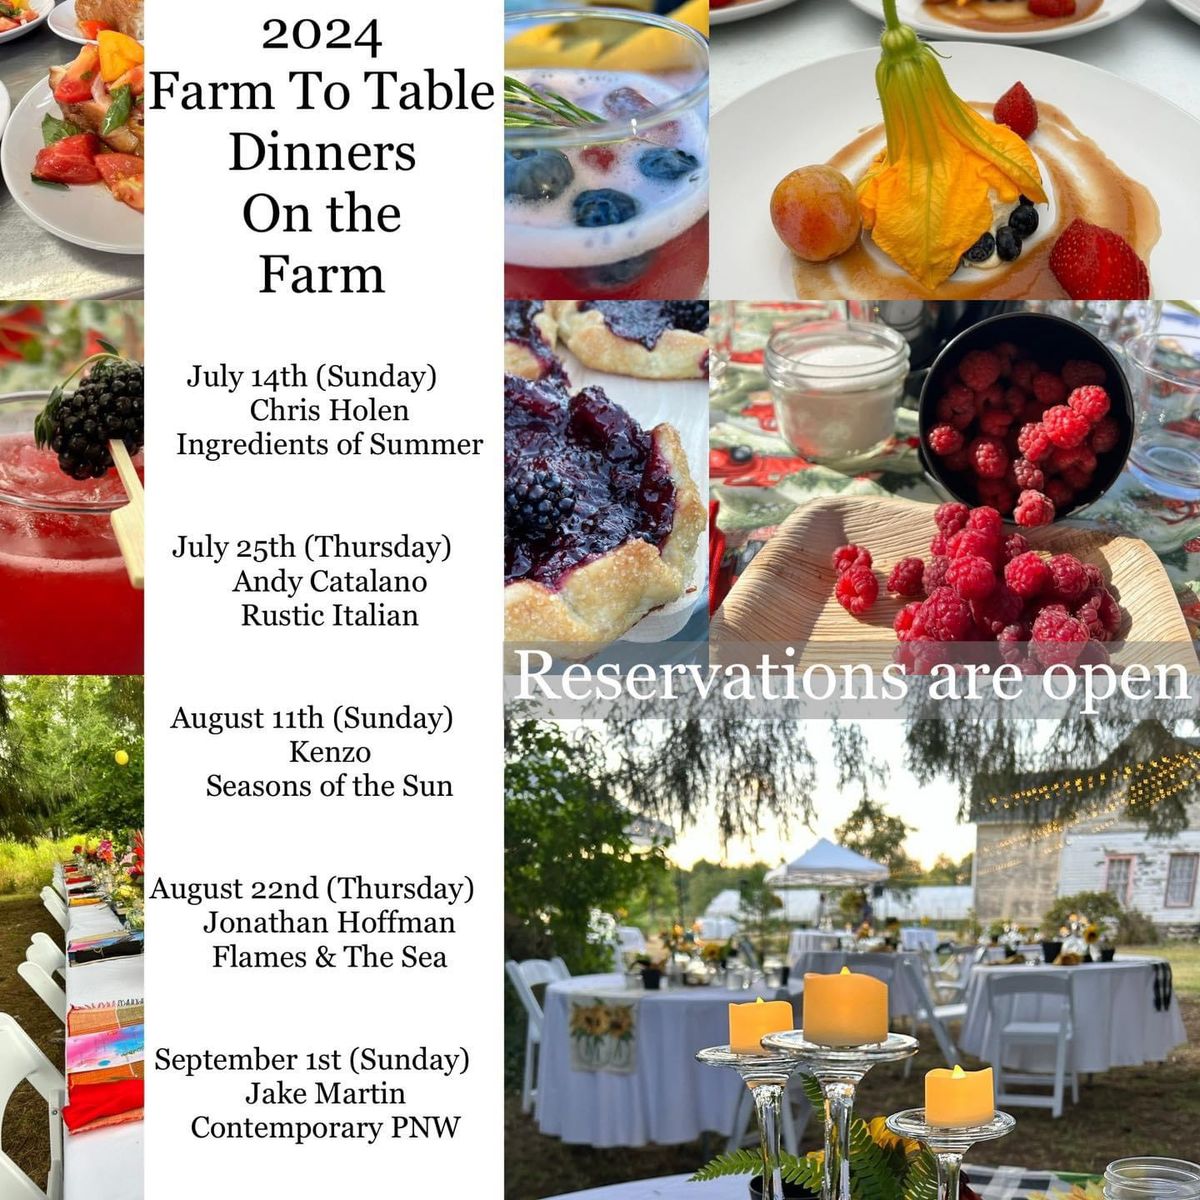 Dinner at the Farm: Guest Chef Chris Holen